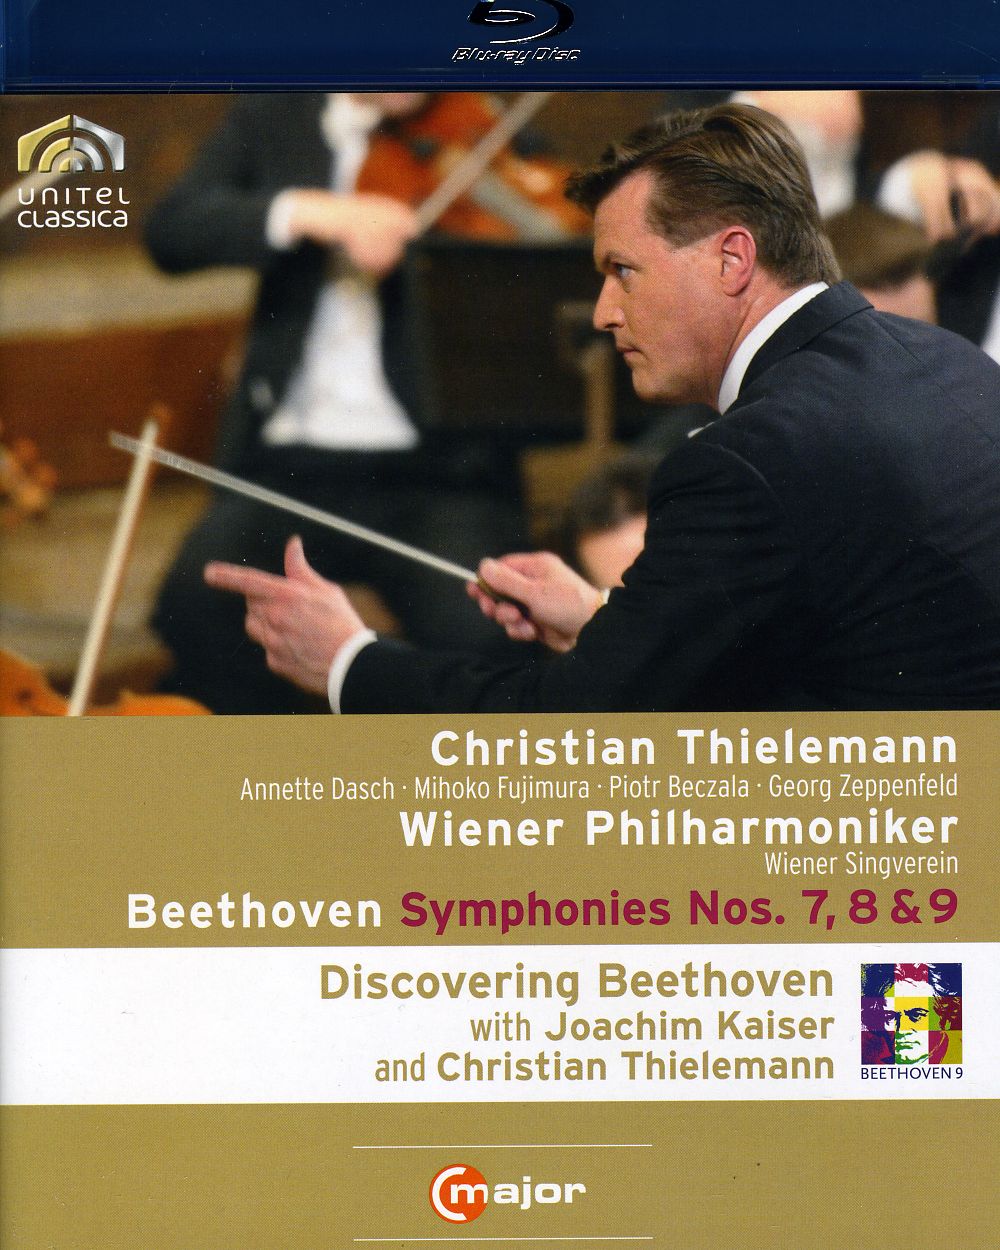 DISCOVERING BEETHOVEN WITH KAISER & THIELEMANN